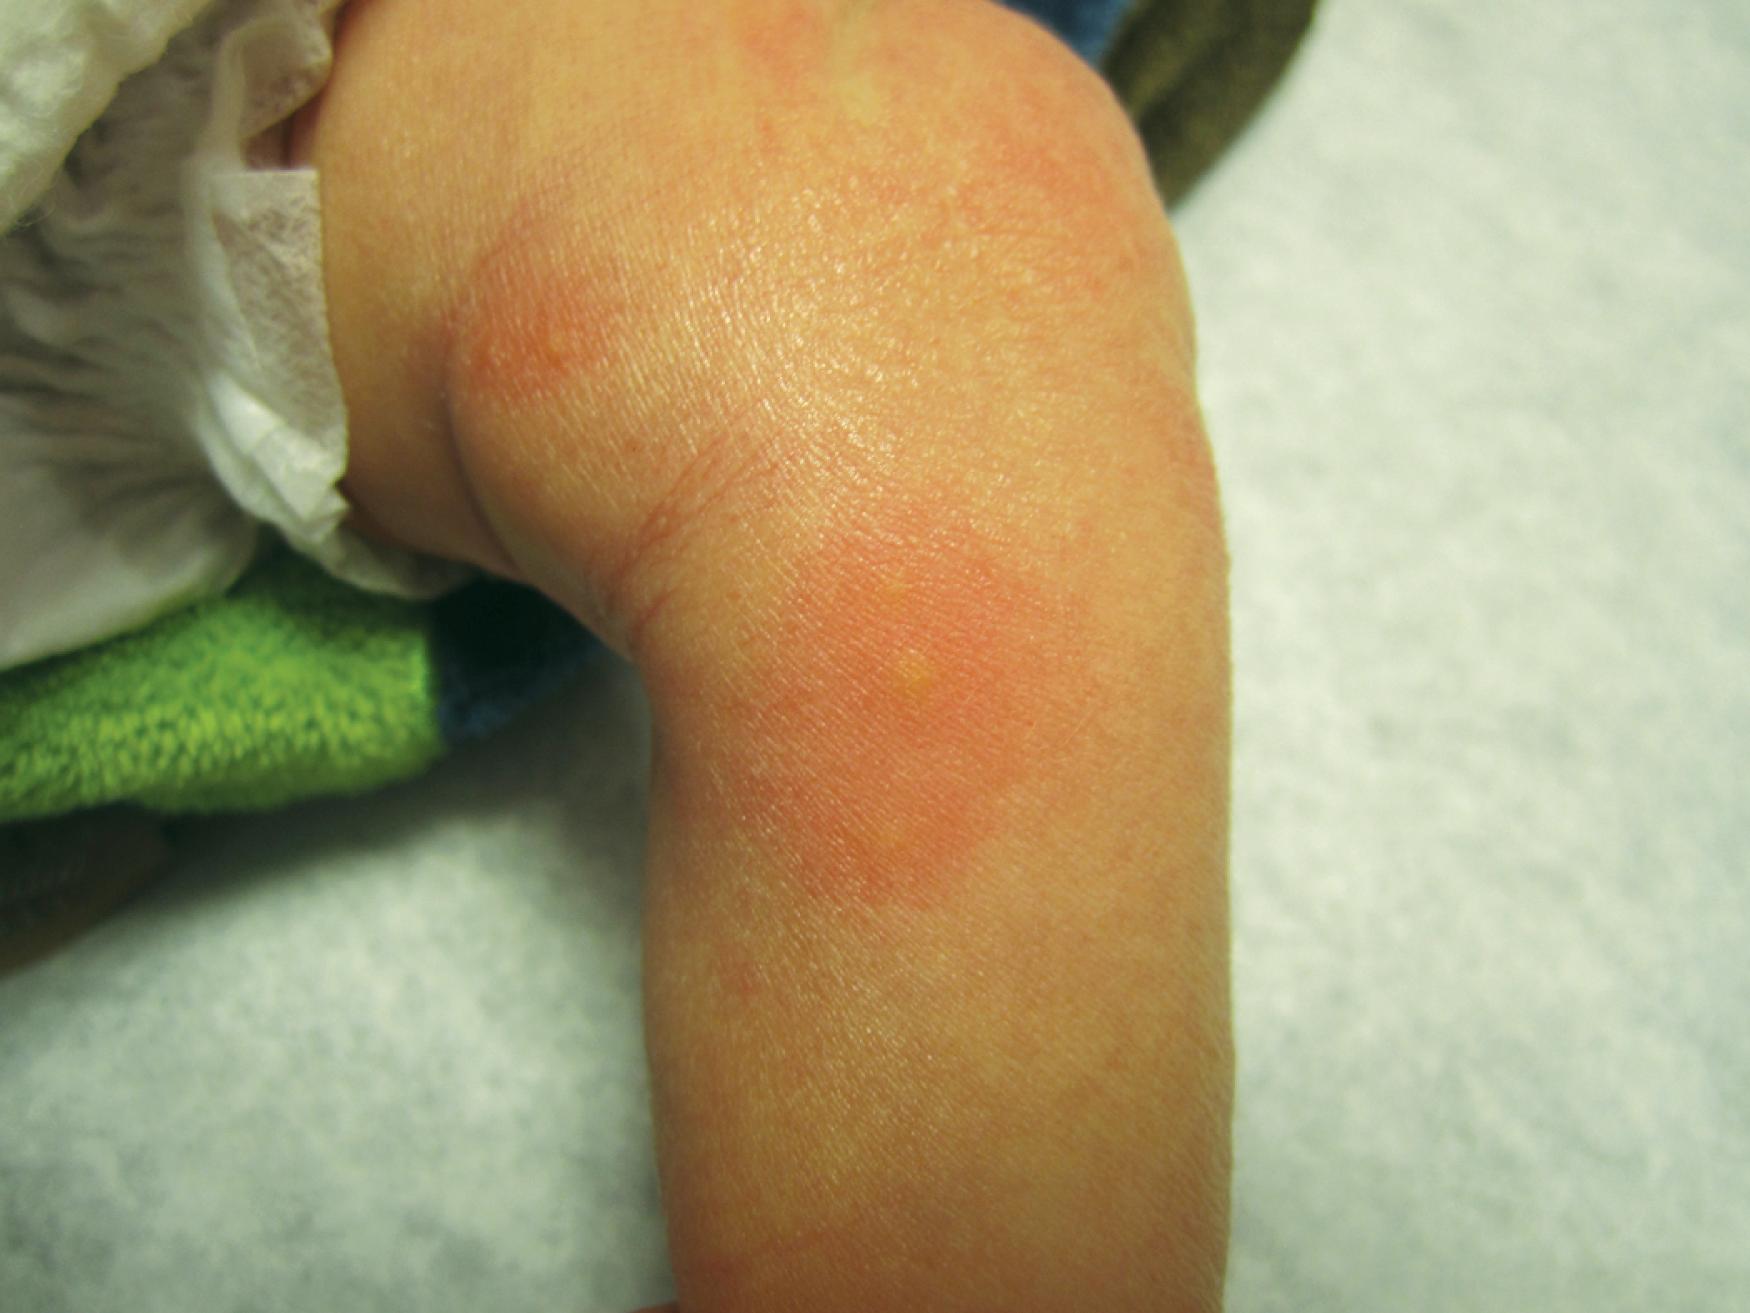 Fig. 60.1, Papules surrounded by erythema are characteristic of erythema toxicum. Typically it is located on the trunk but can be on the extremities as well.